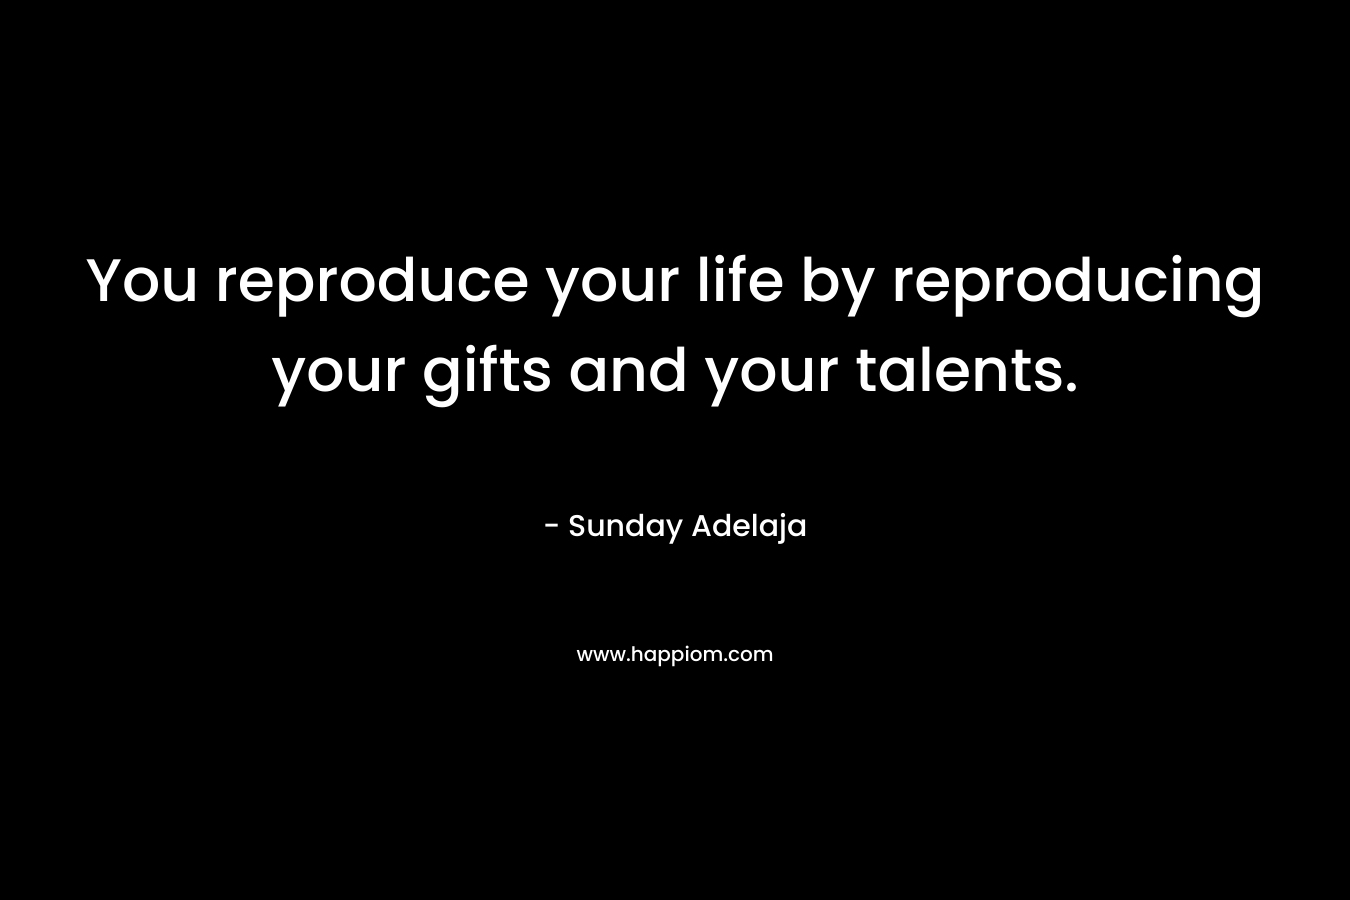 You reproduce your life by reproducing your gifts and your talents.